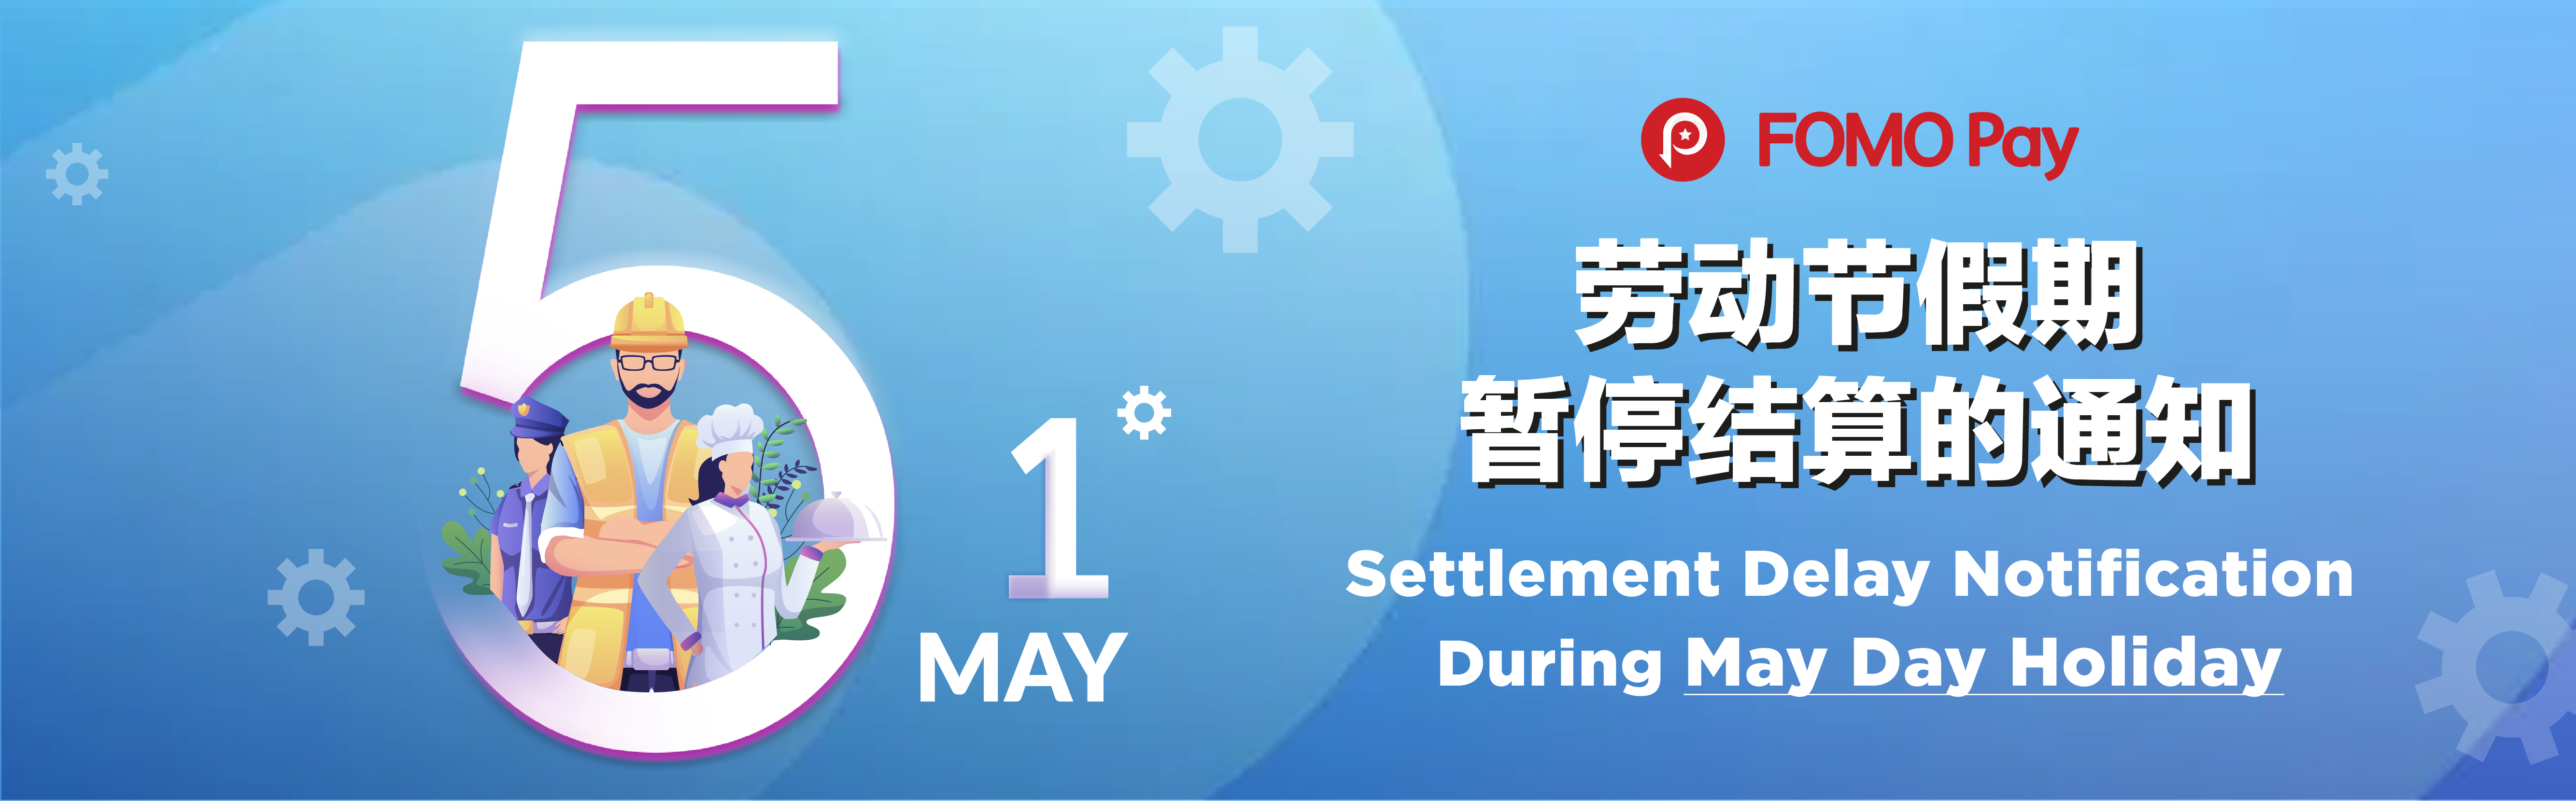 Settlement Delay Notification During Labour Day in China 关于2022年中国五一劳动节假期暂停结算的通知